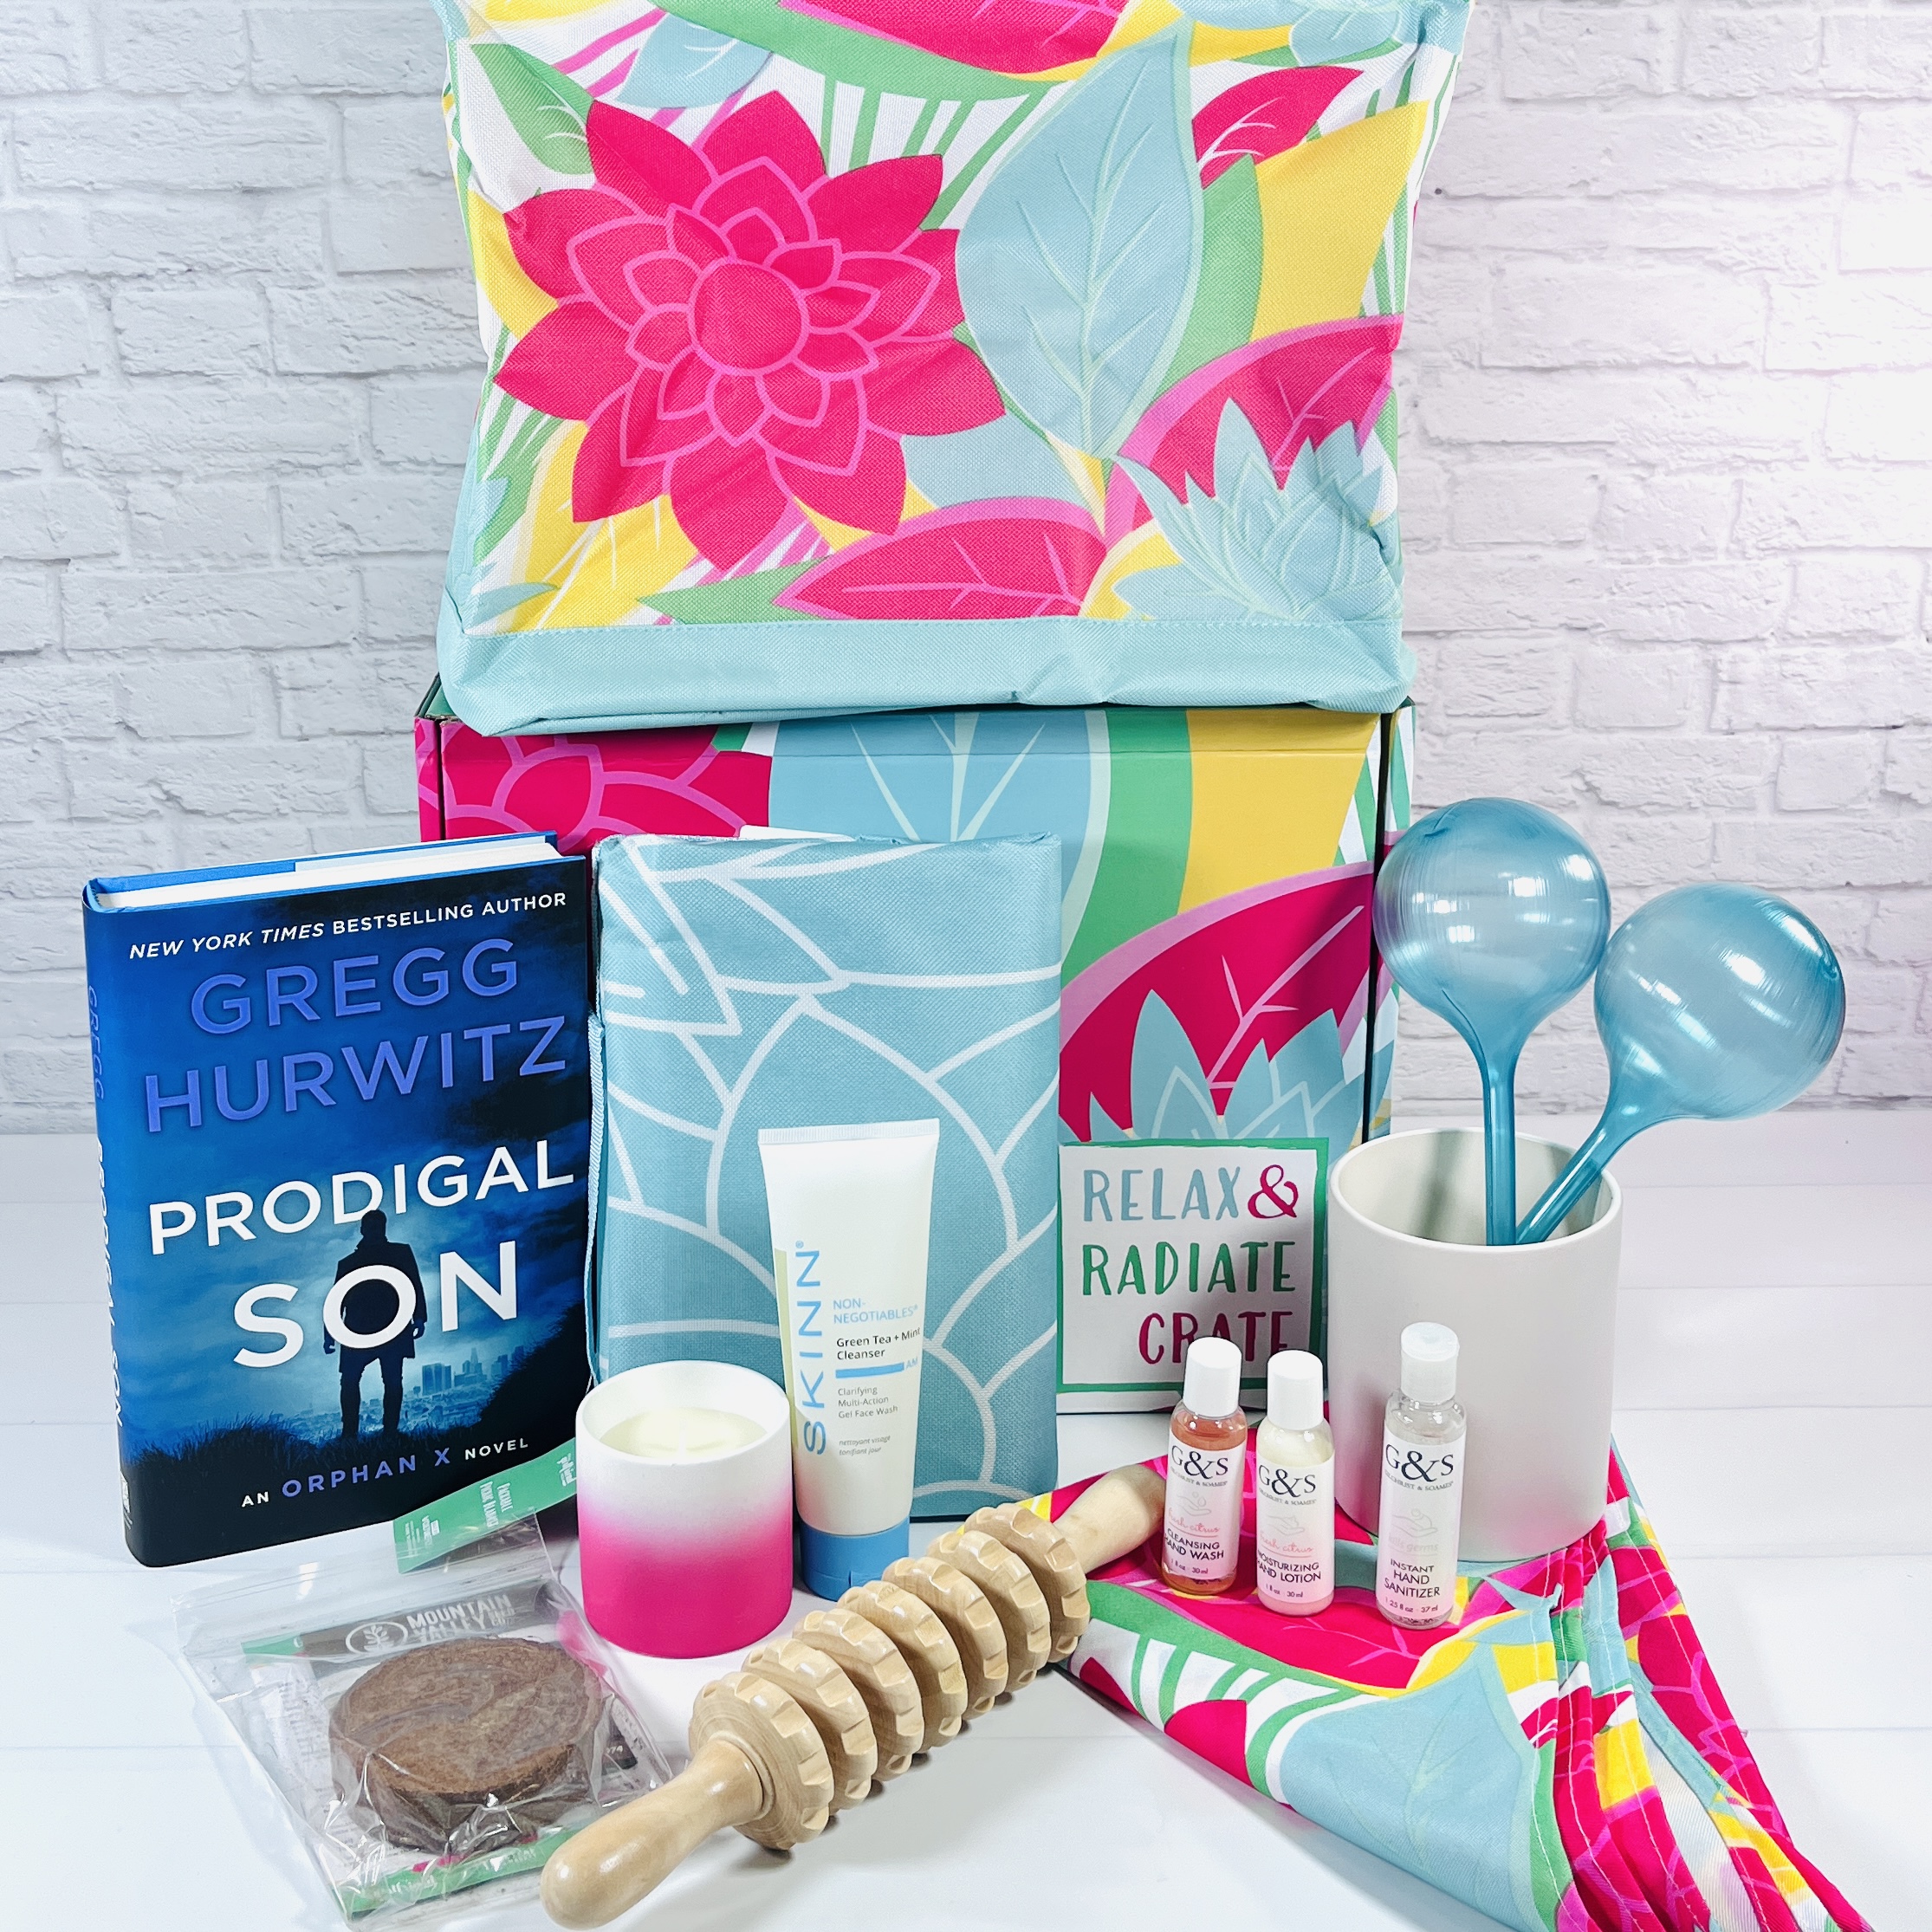 Relax & Radiate Crate Spring 2022 Subscription Box Review Hello